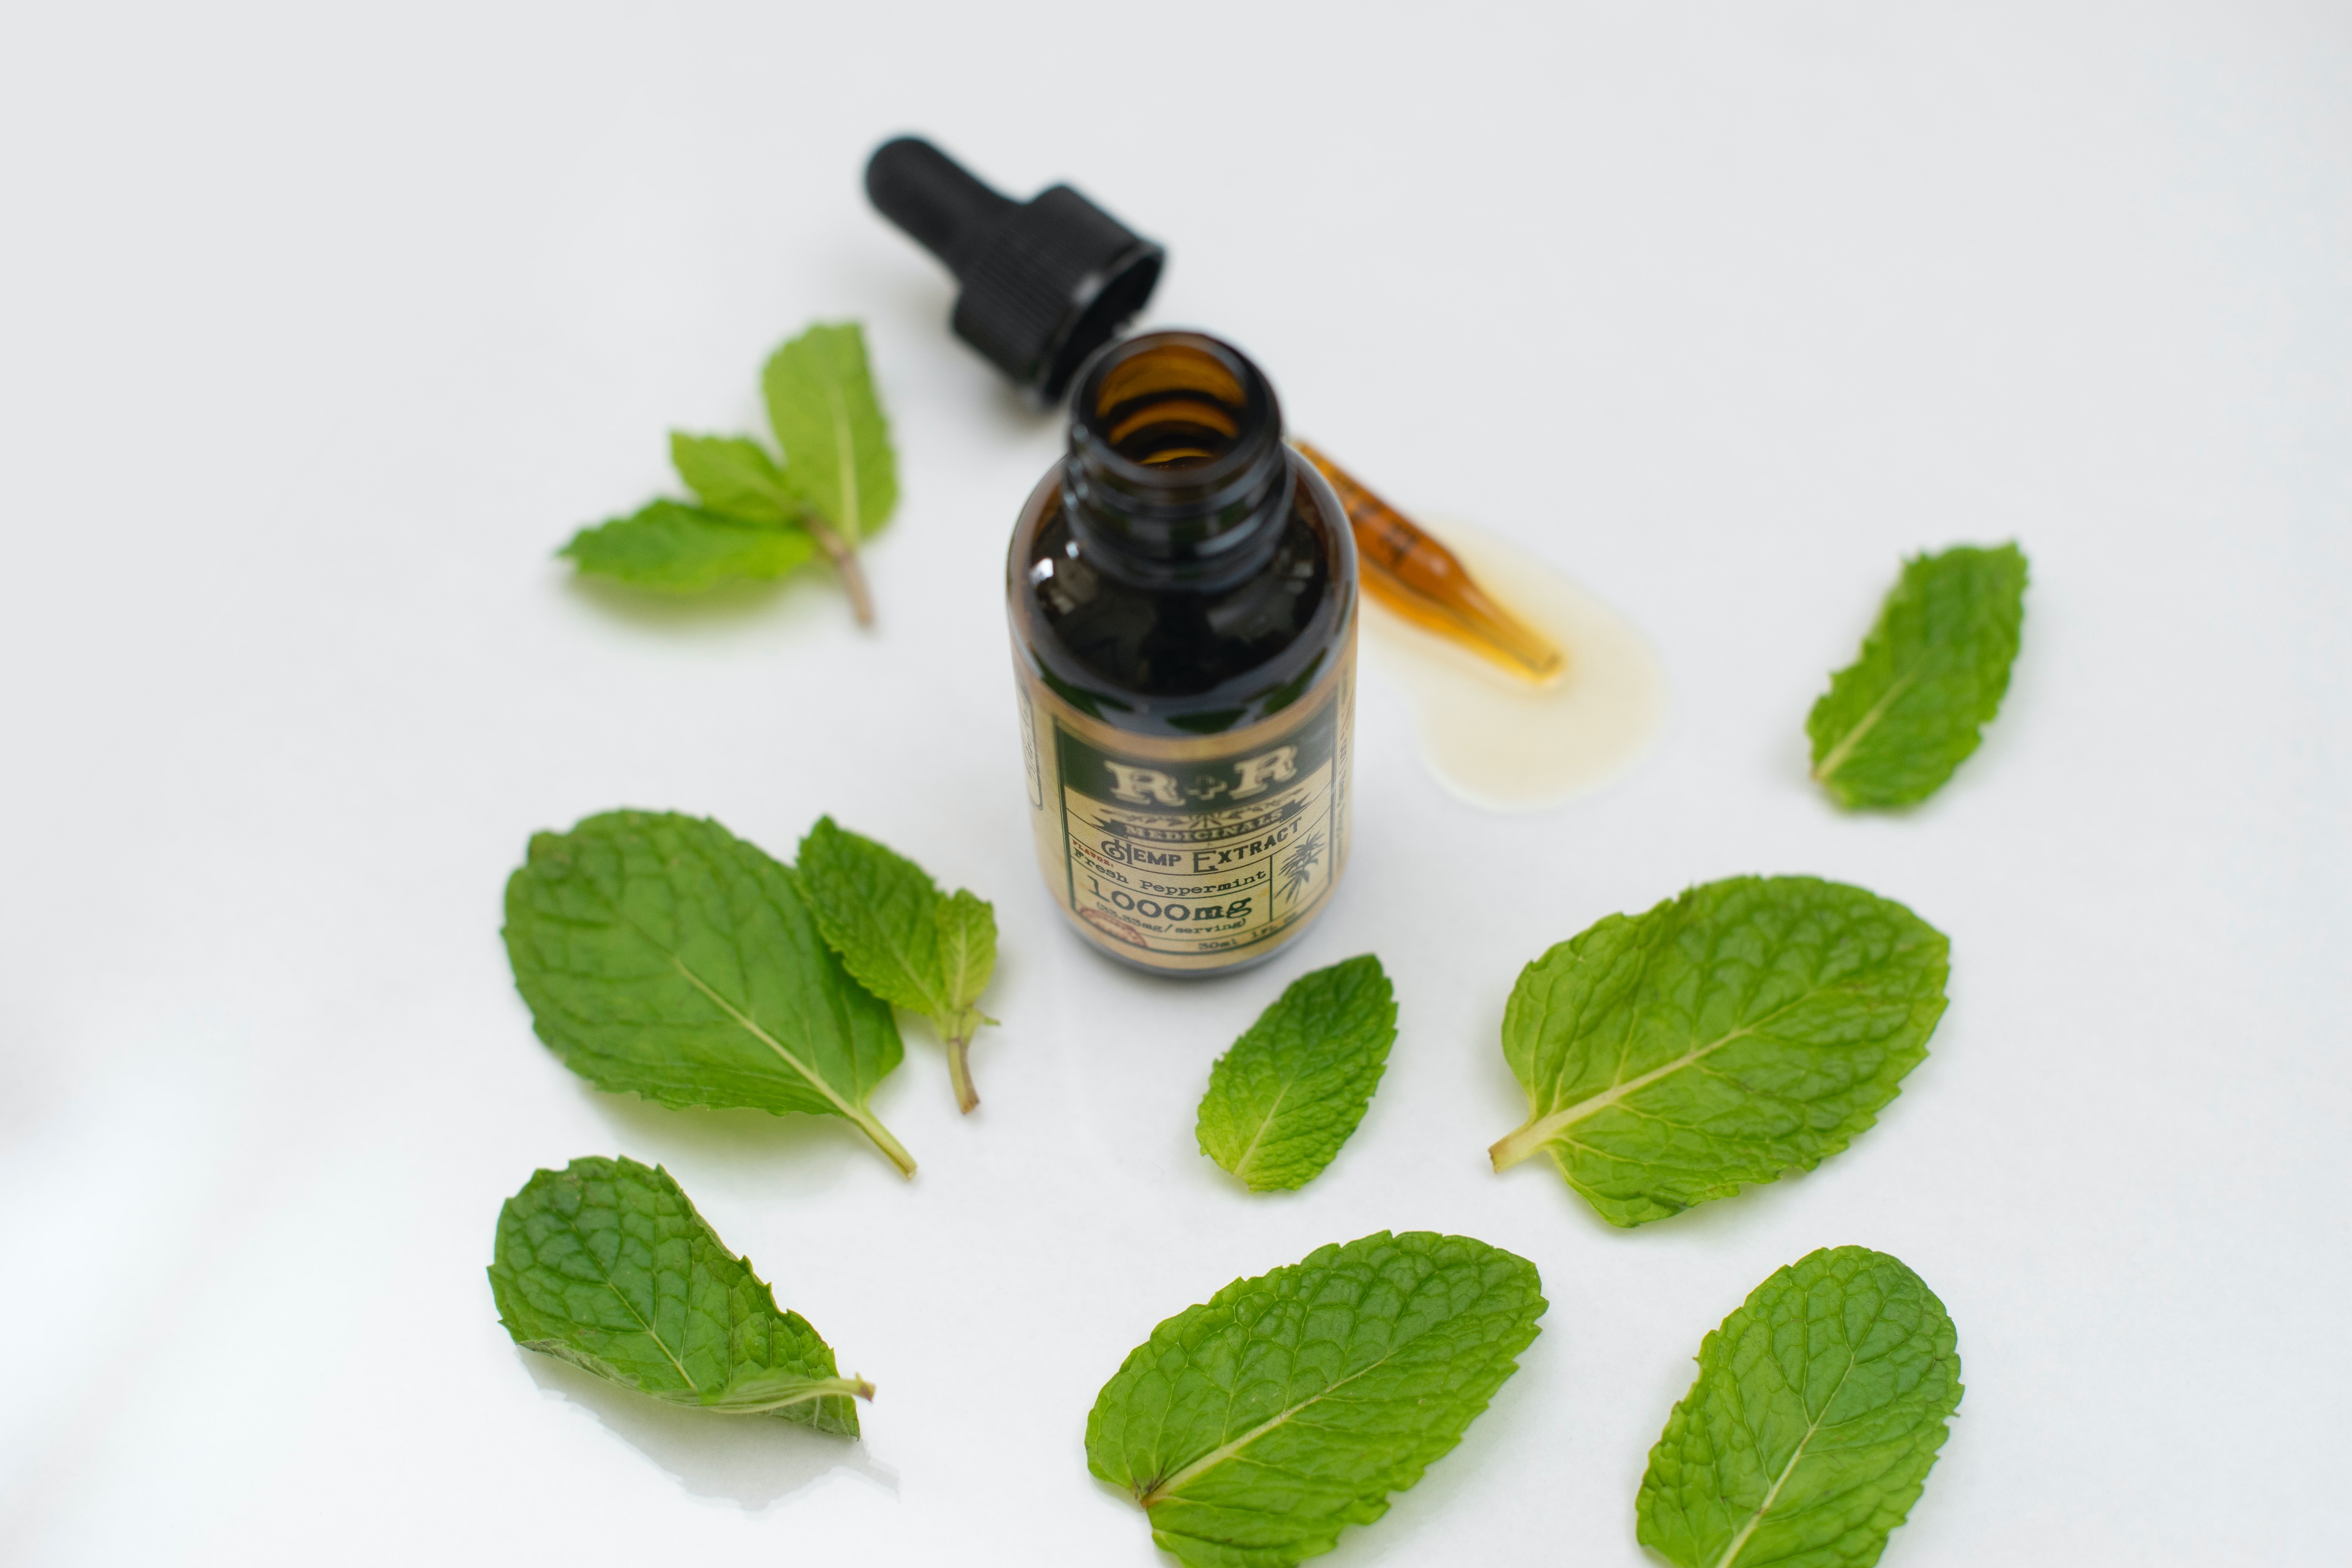 A small brown bottle and dropper are surrounded by green peppermint leaves.